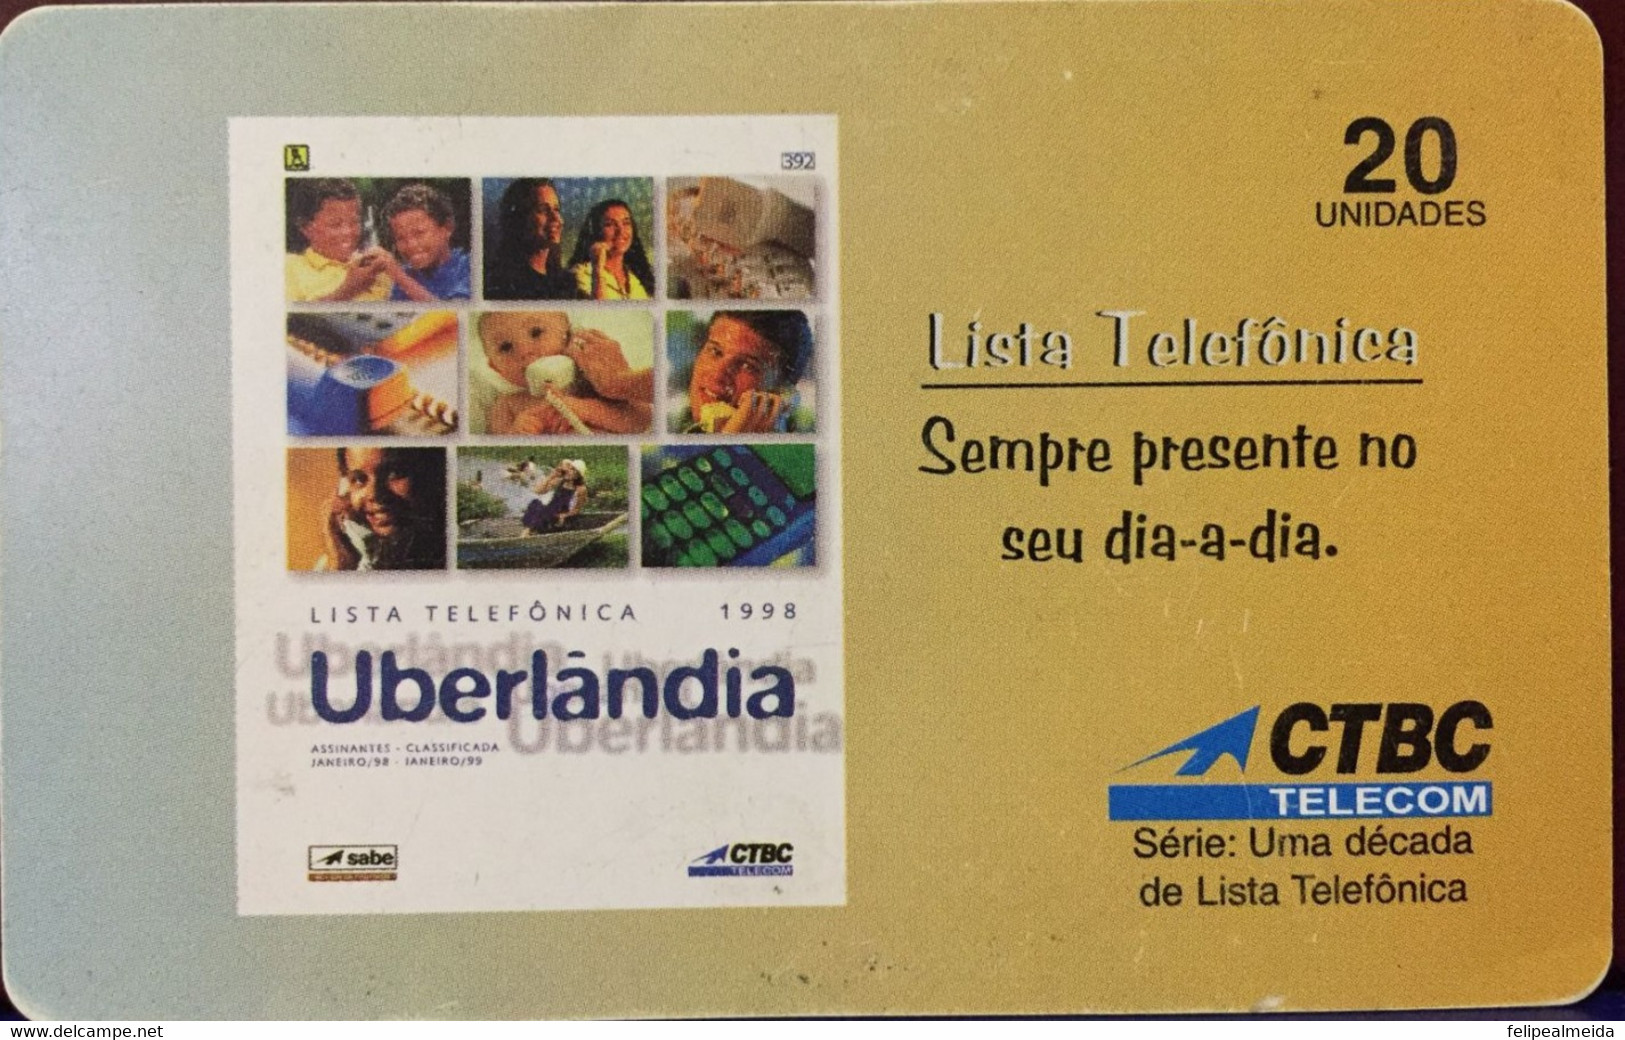 Phone Card Manufactured By CTBC Telecom In 1998 - Phonebook Always Present In Your Daily Life - Telekom-Betreiber